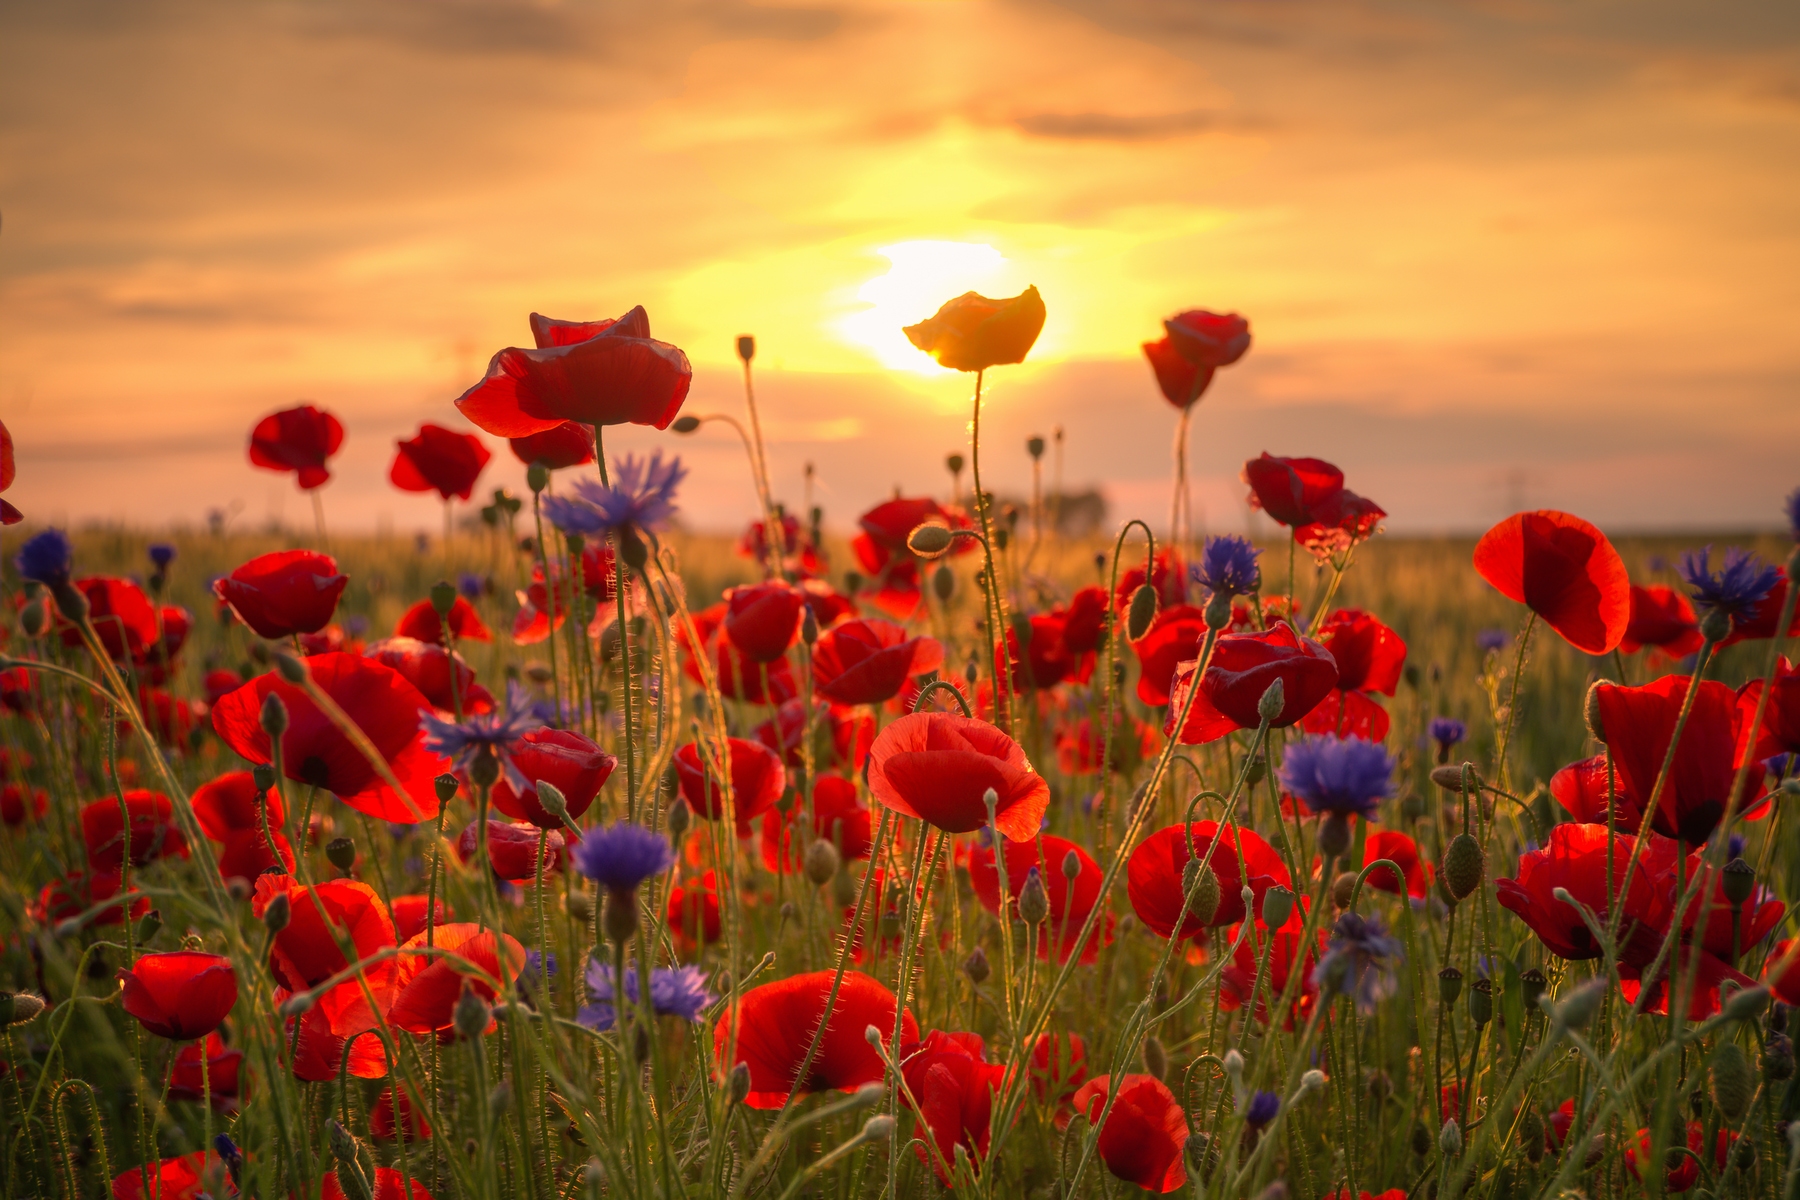 Poppies Sunset Wallpaper Buy Online Happywall